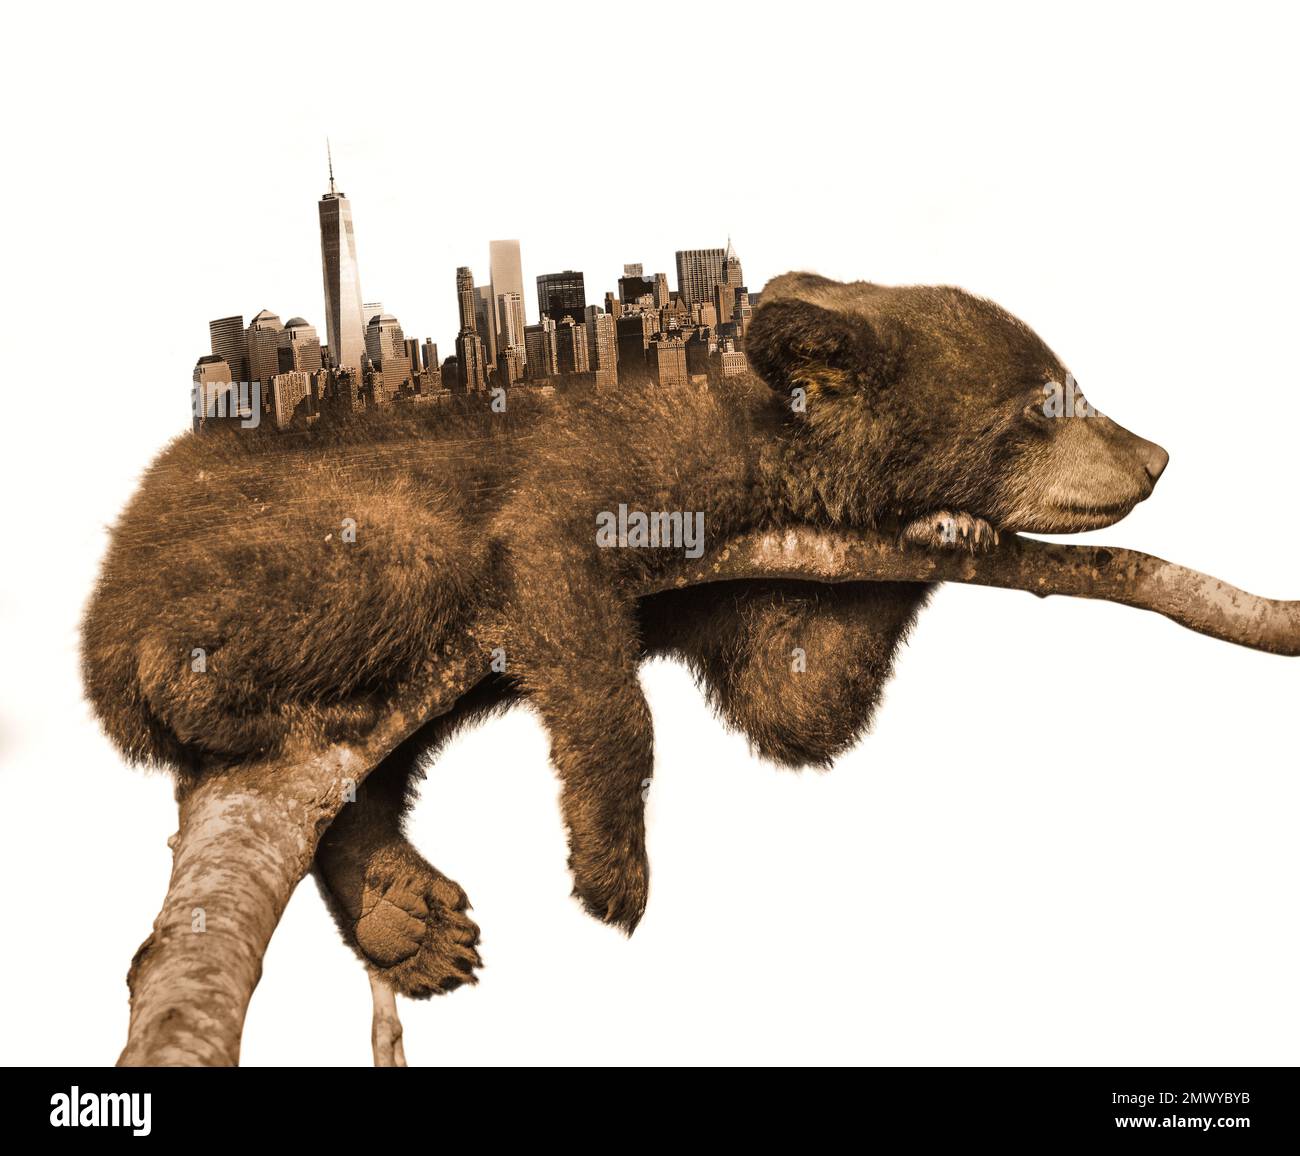 Sleeping bear. City silhouette on bear's back. The bear is sleeping on the branch. To take away the natural life of animals. Photo manipulation. Stock Photo